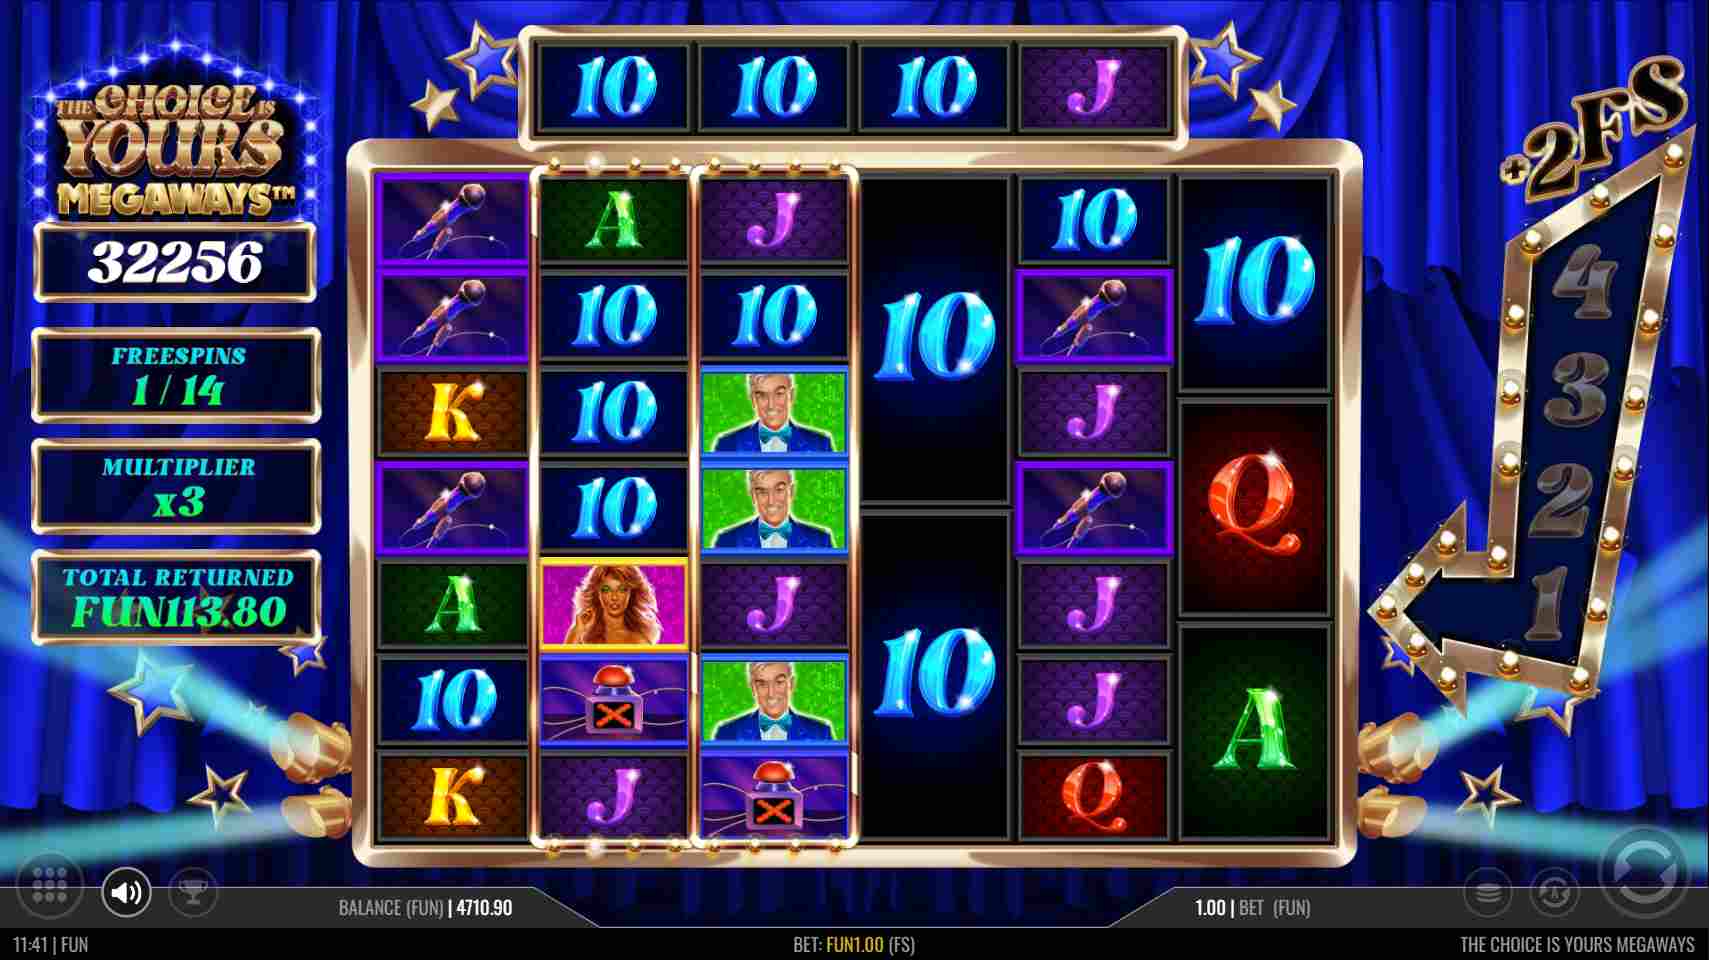 The Choice is Yours Megaways Free Spins